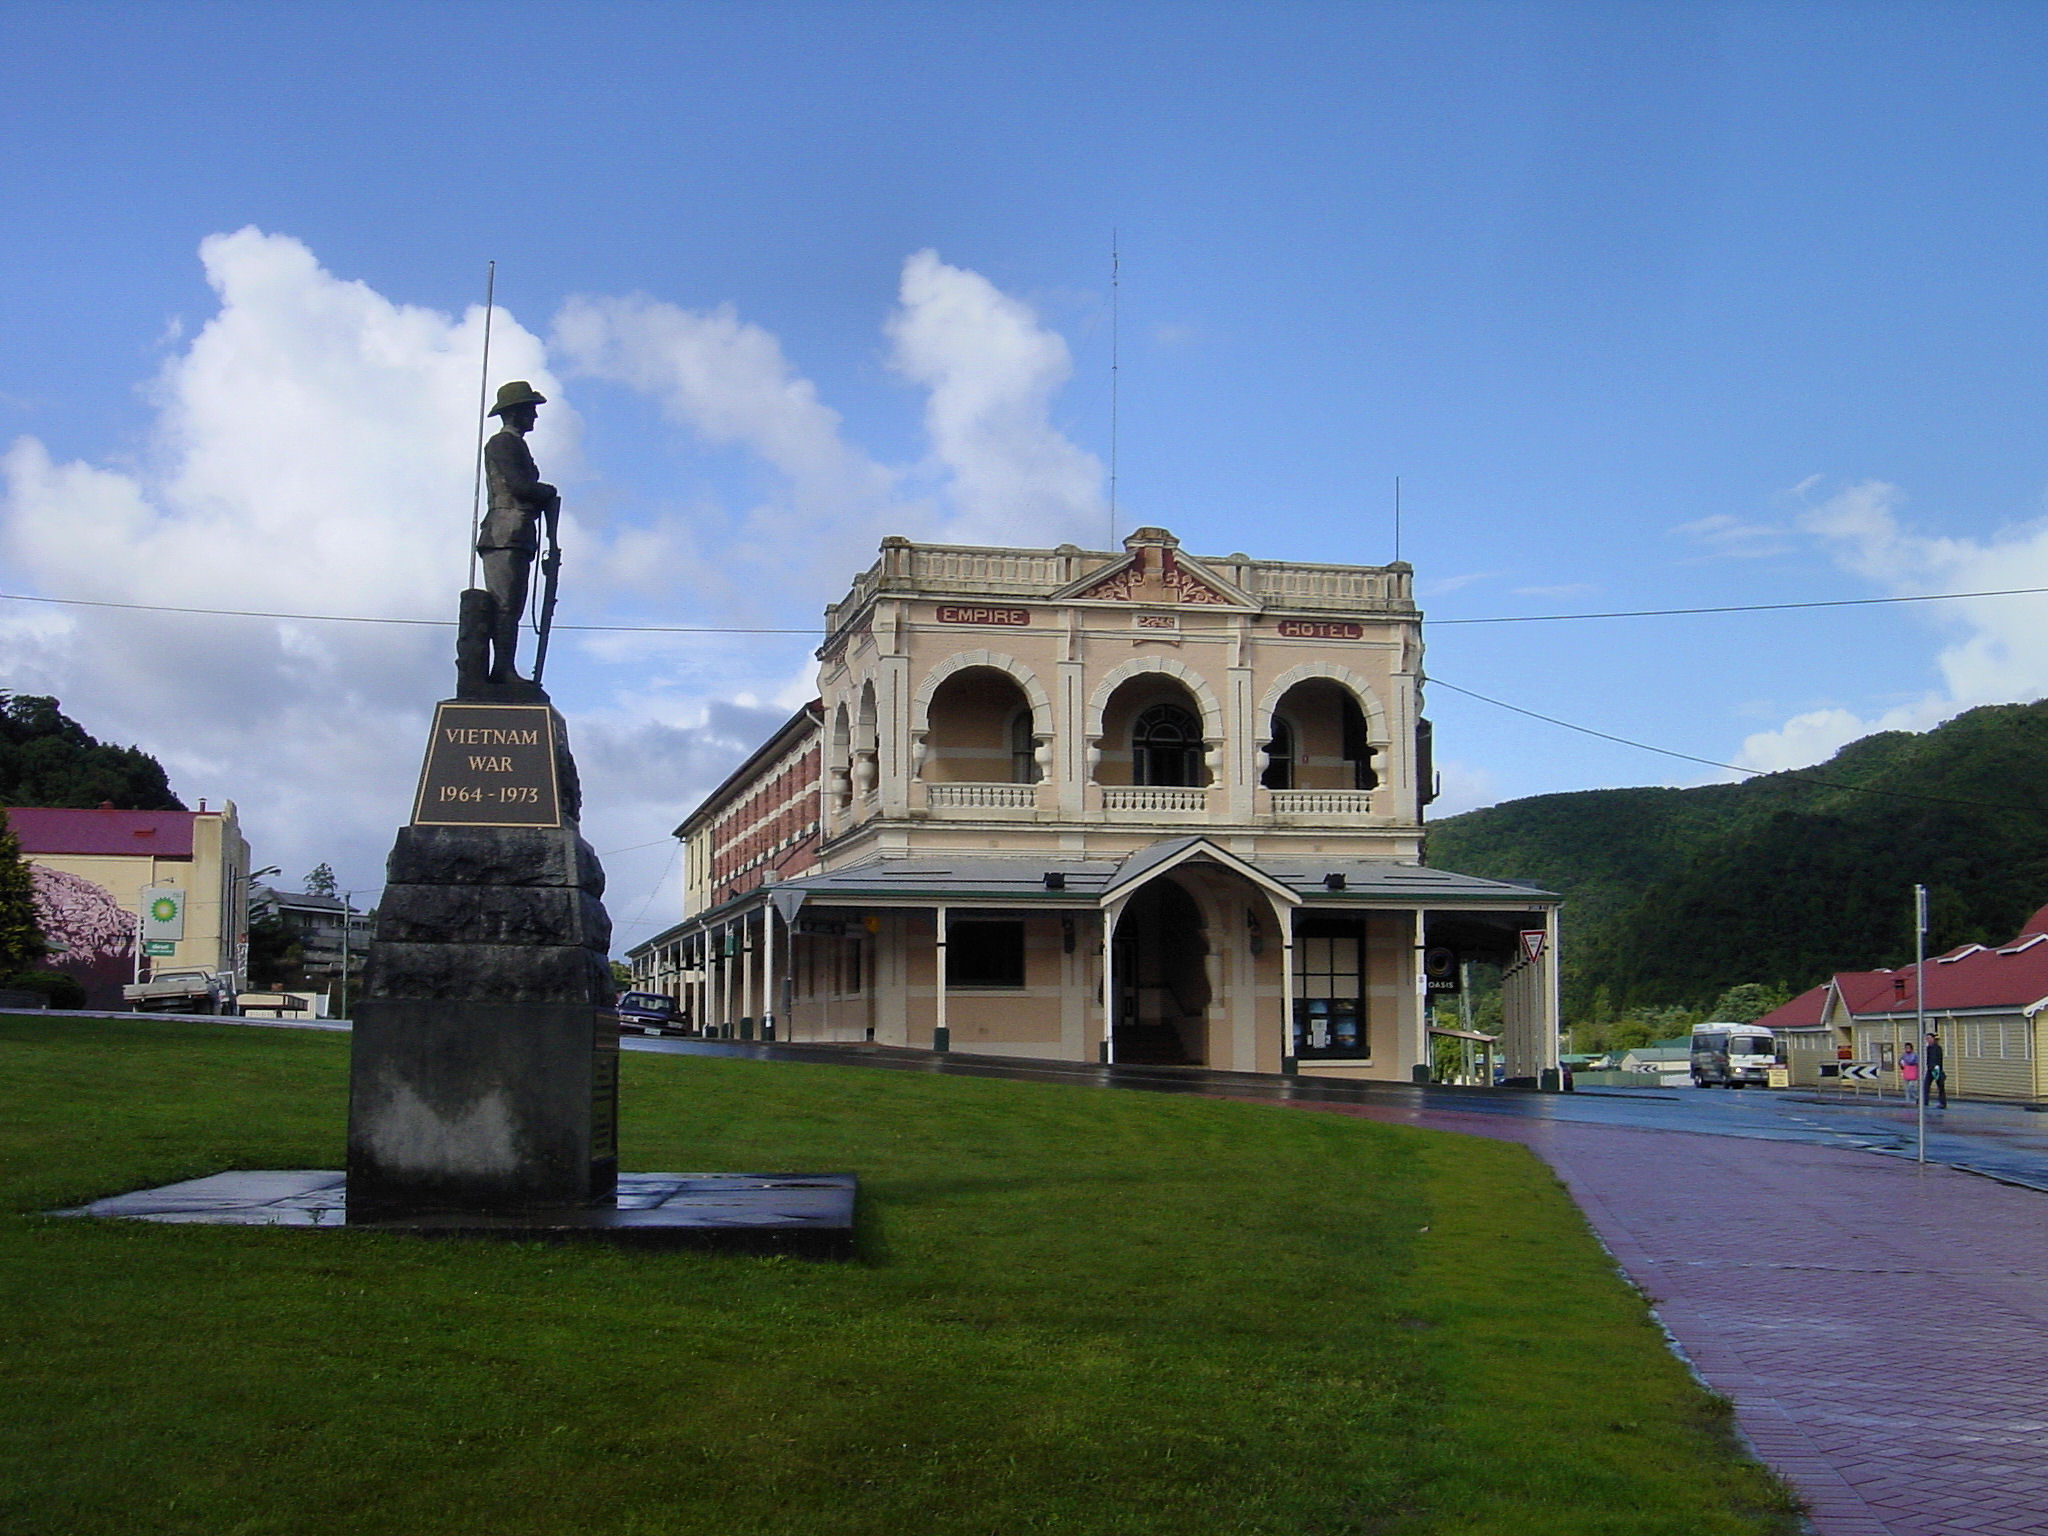 an old statue stands on a grassy lawn near a small town with lots of buildings